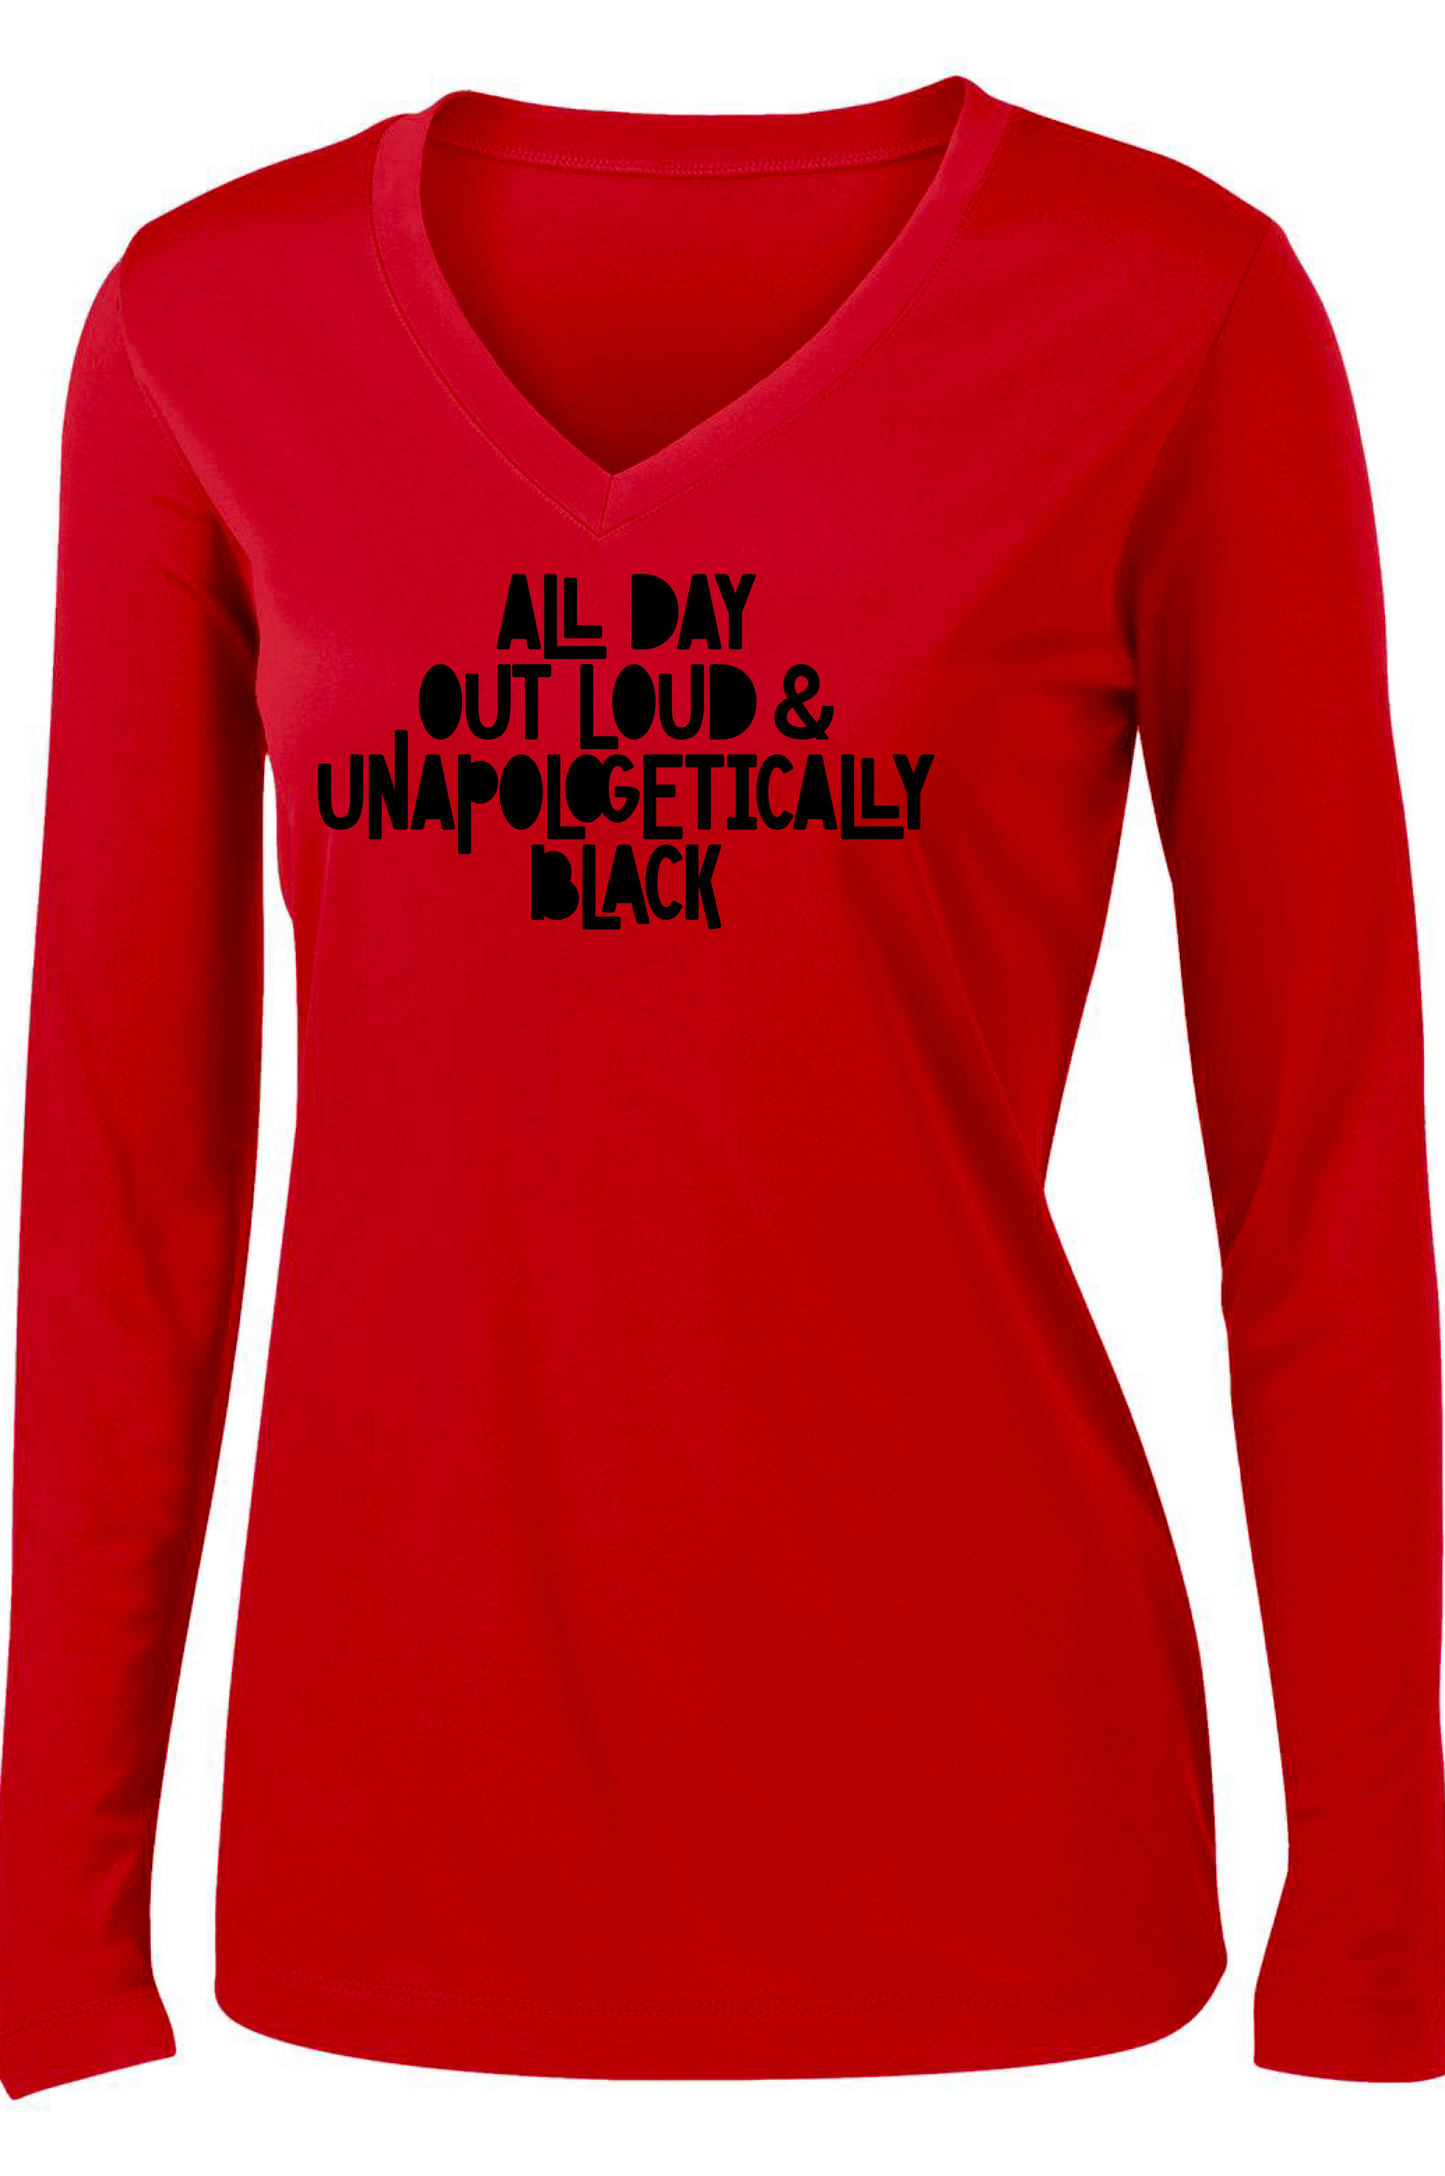 All Day Out Loud & Apologetically Black Long Sleeve T-shirt